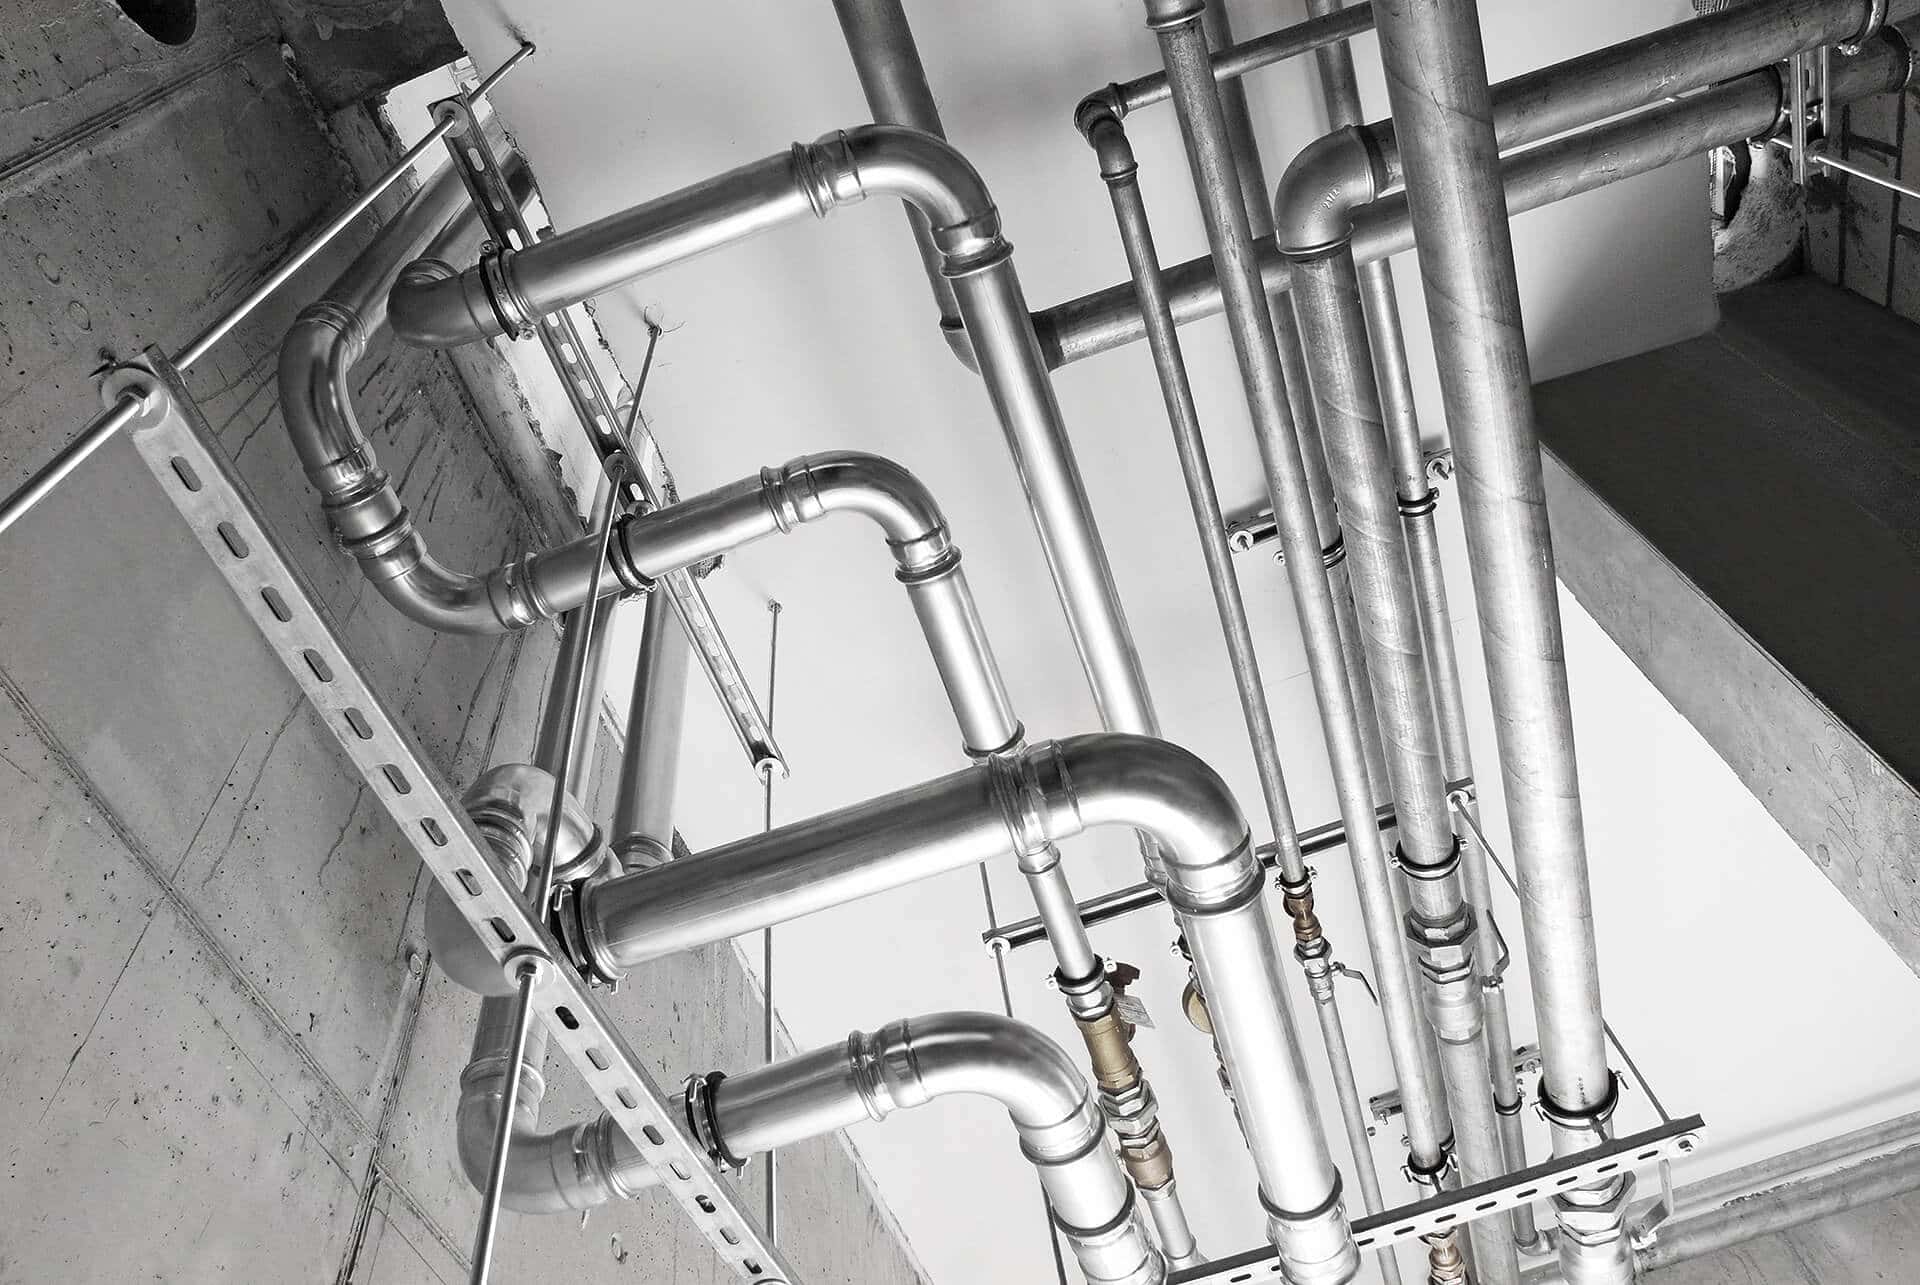 KAN-therm - Inox System - Rohre und Fittings aus Edelstahl.